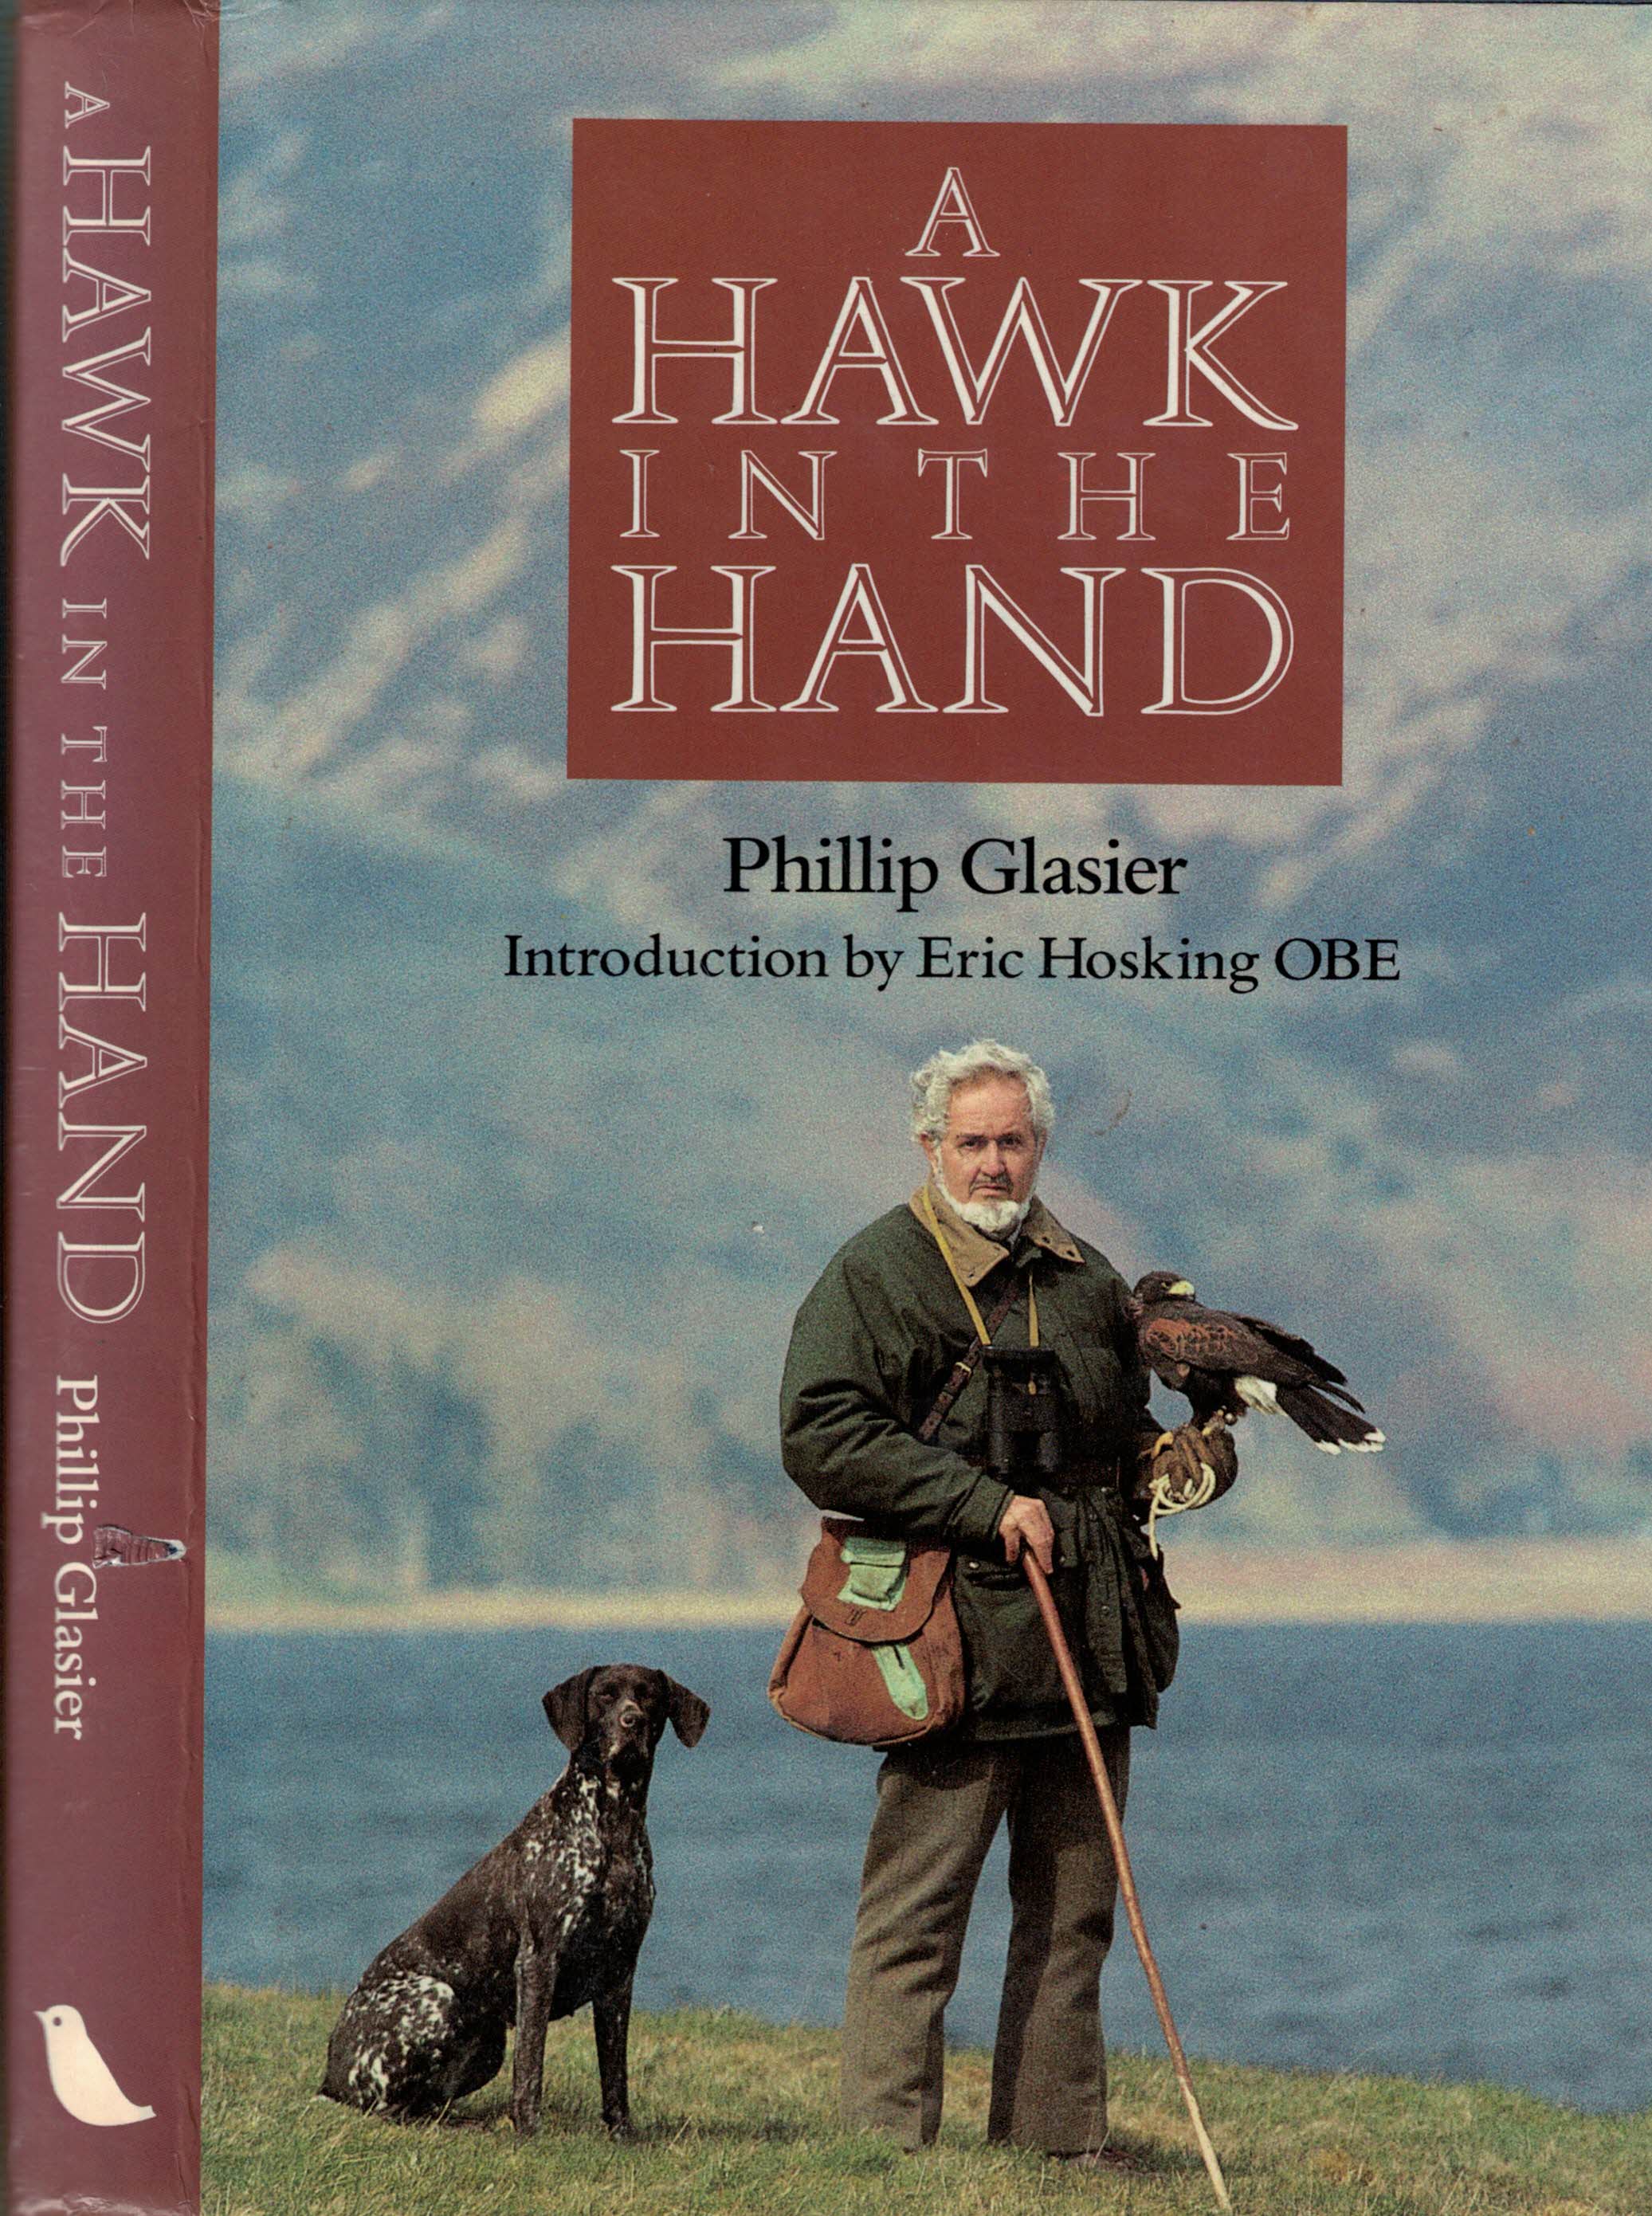 A Hawk in the Hand. Signed copy.